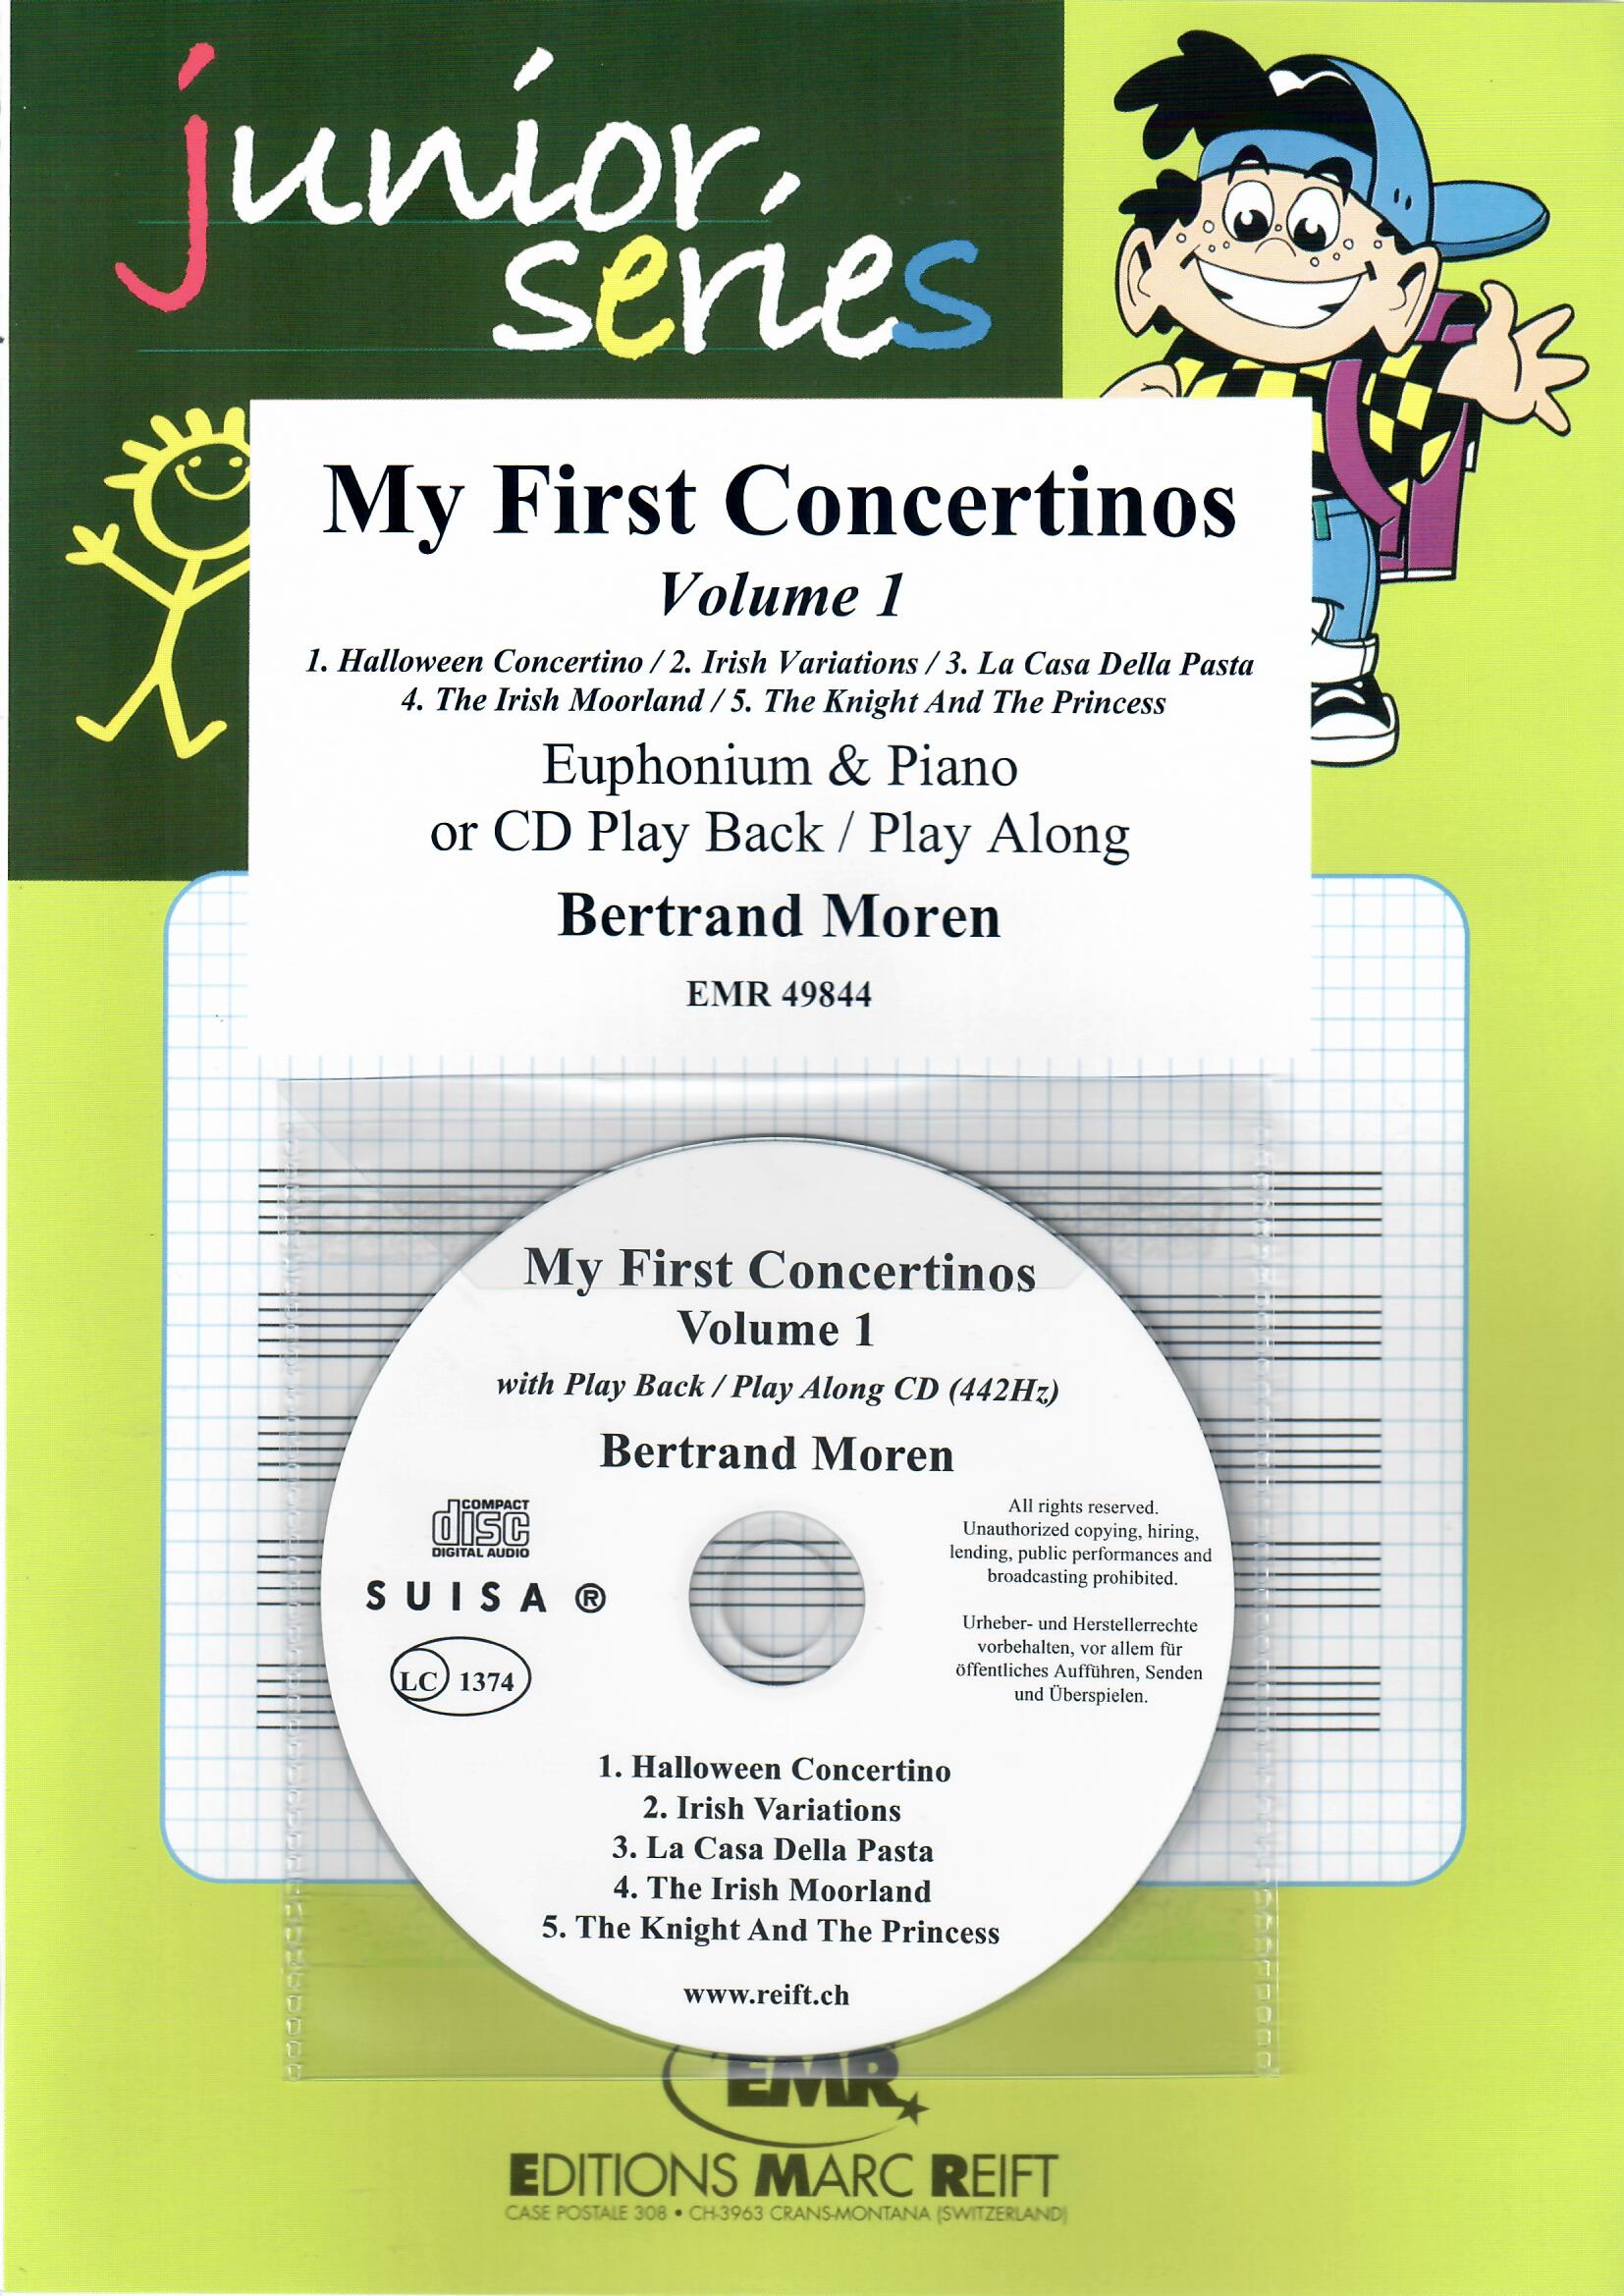 MY FIRST CONCERTINOS VOLUME 1 - Euphonium & Piano, BOOKS with CD Accomp., SOLOS - Euphonium